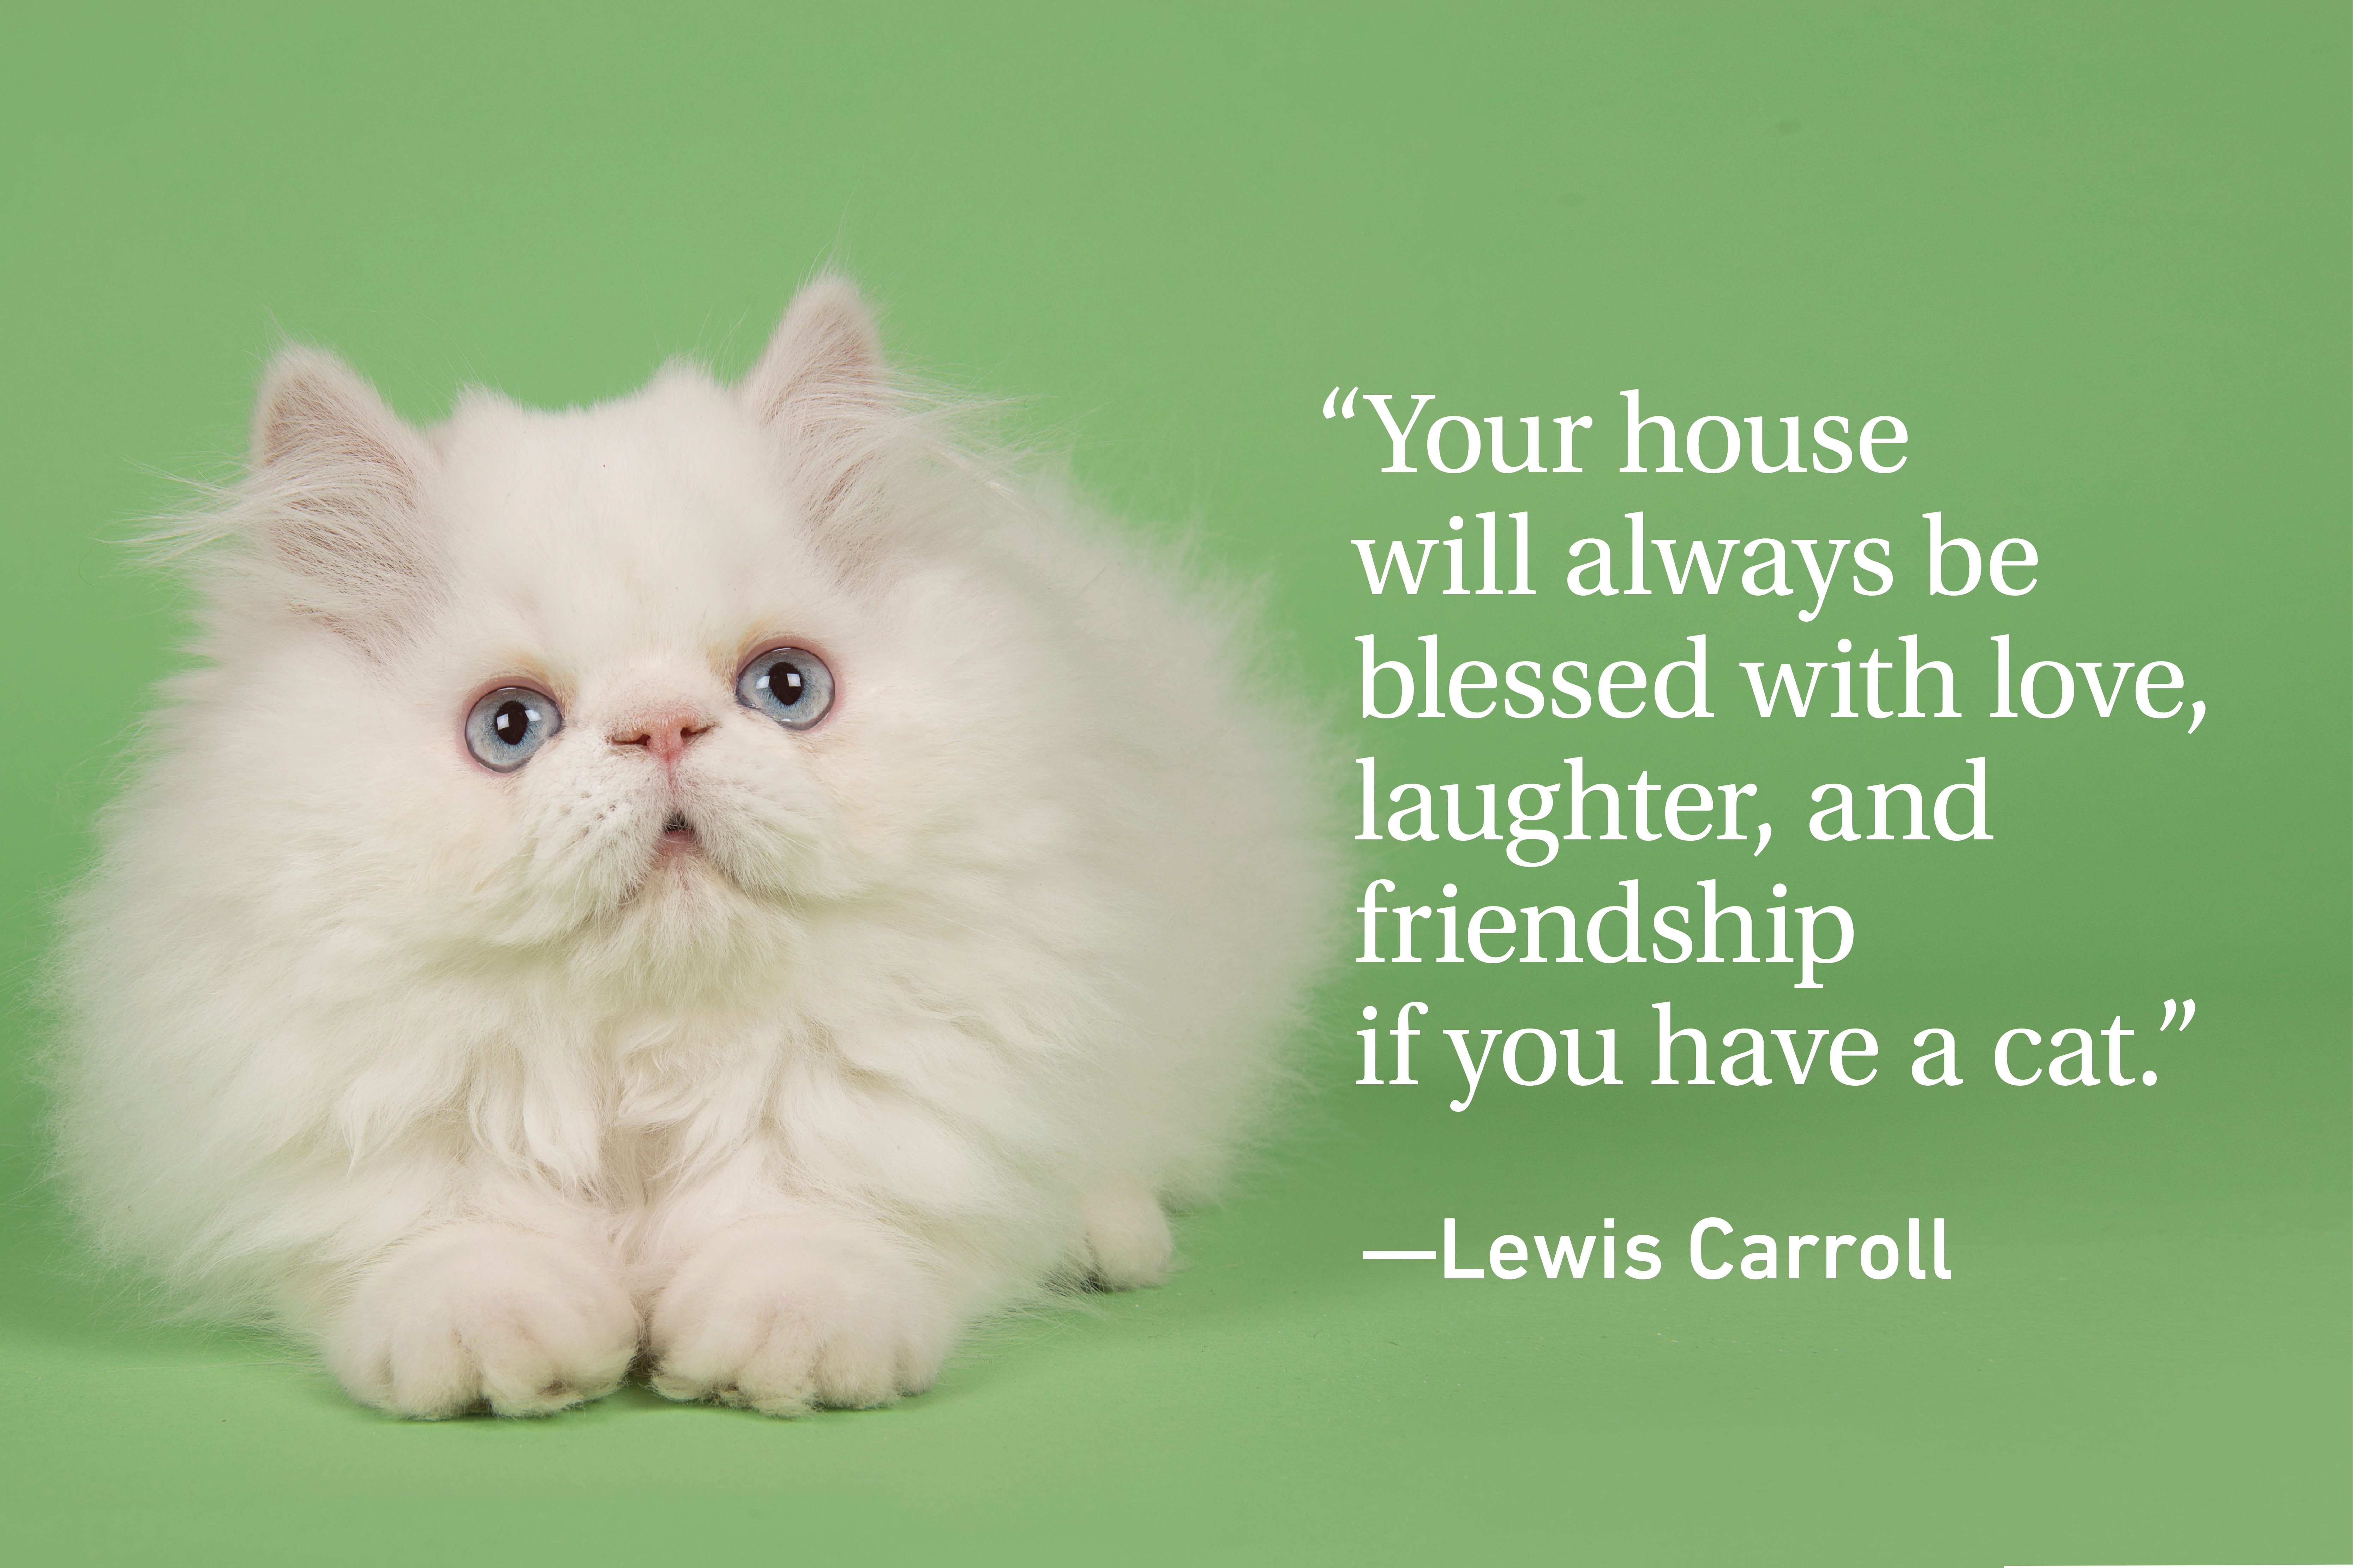 Cat quote on green background with a white cat